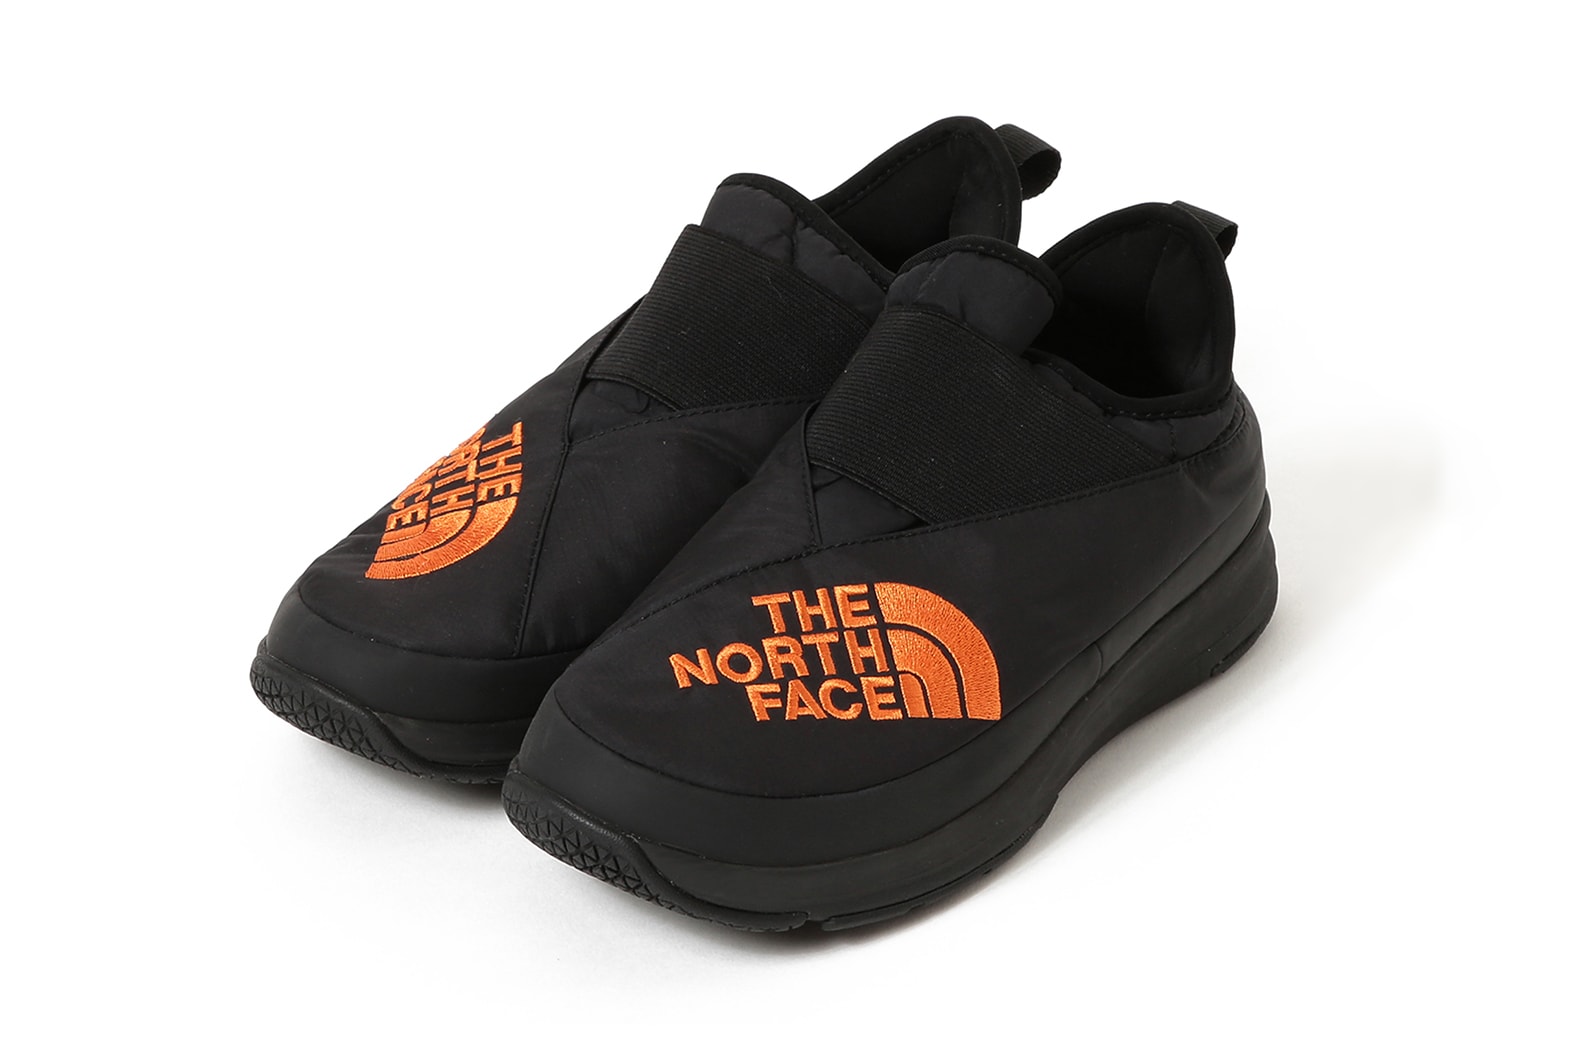 BEAMS the north face nuptse bootie moc waterproof slip on boot fall winter 2018 collaboration footwear japan black orange blue white colorways october 2018 drop release date info official look buy sell sale